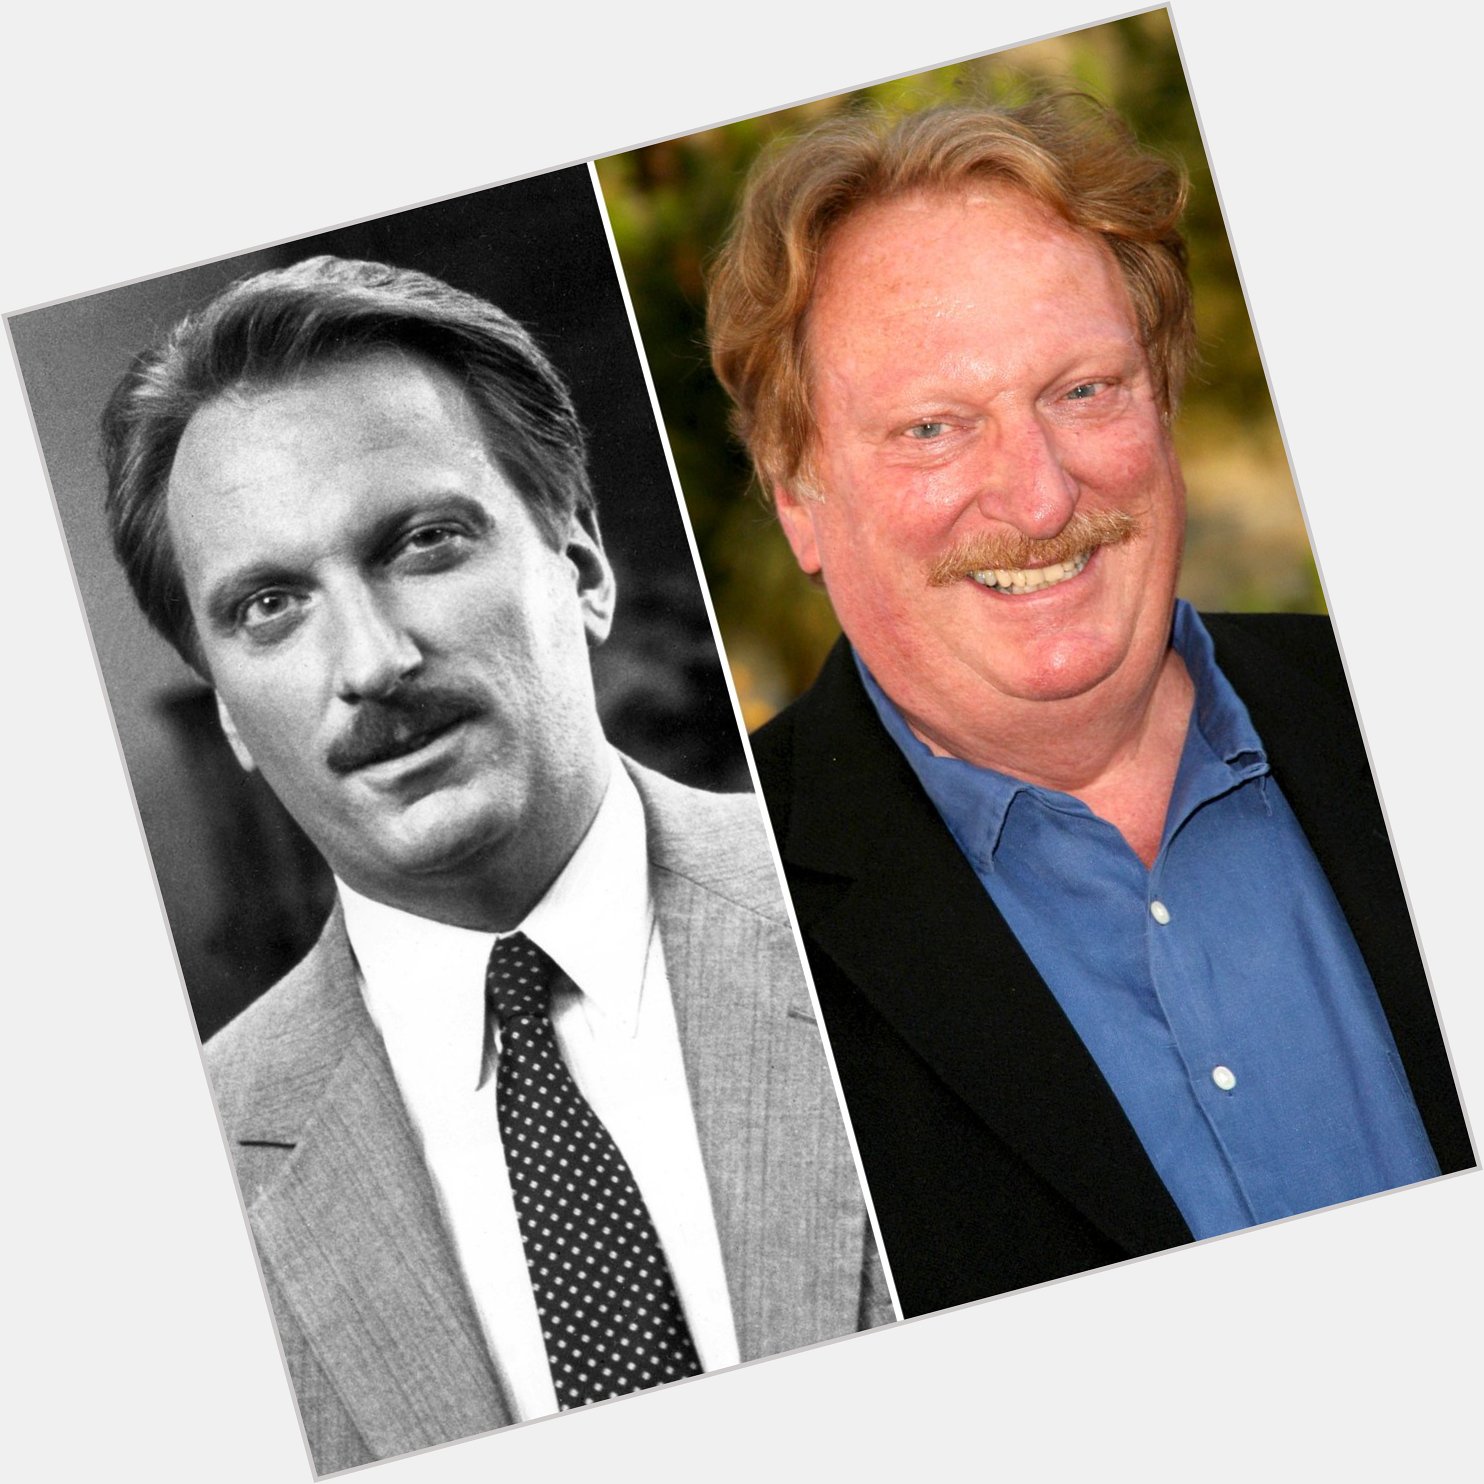 Happy Birthday to Jeffrey Jones Thank you for great movies like Stay Tuned and Beetlejuice 